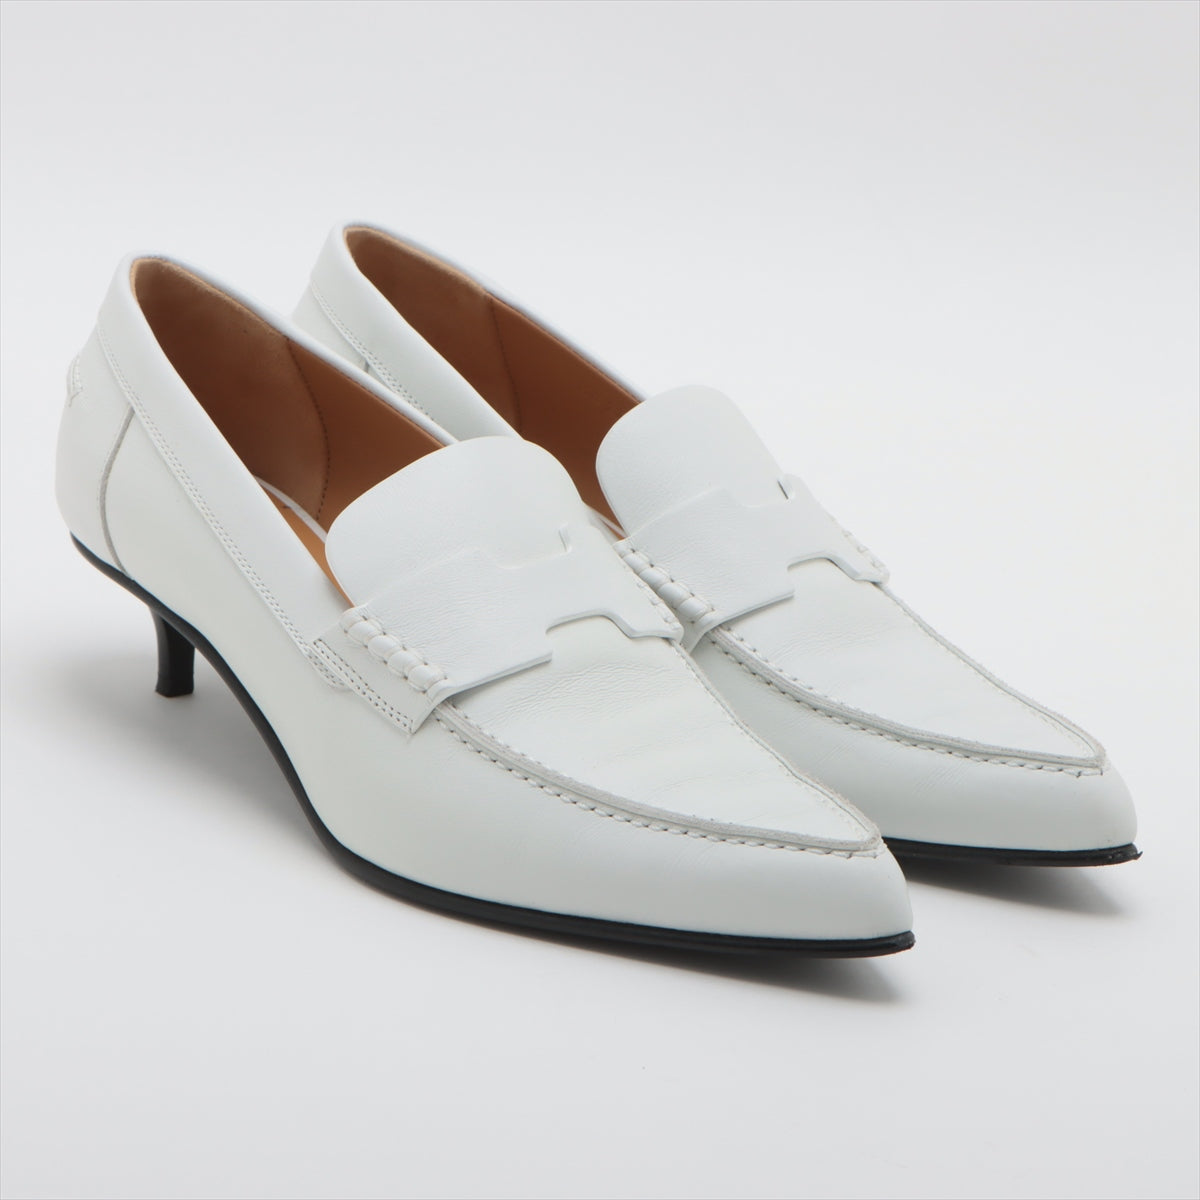 Hermès Glorious Leather Pumps 37.5 Ladies' White with replacement lift box There is a storage bag